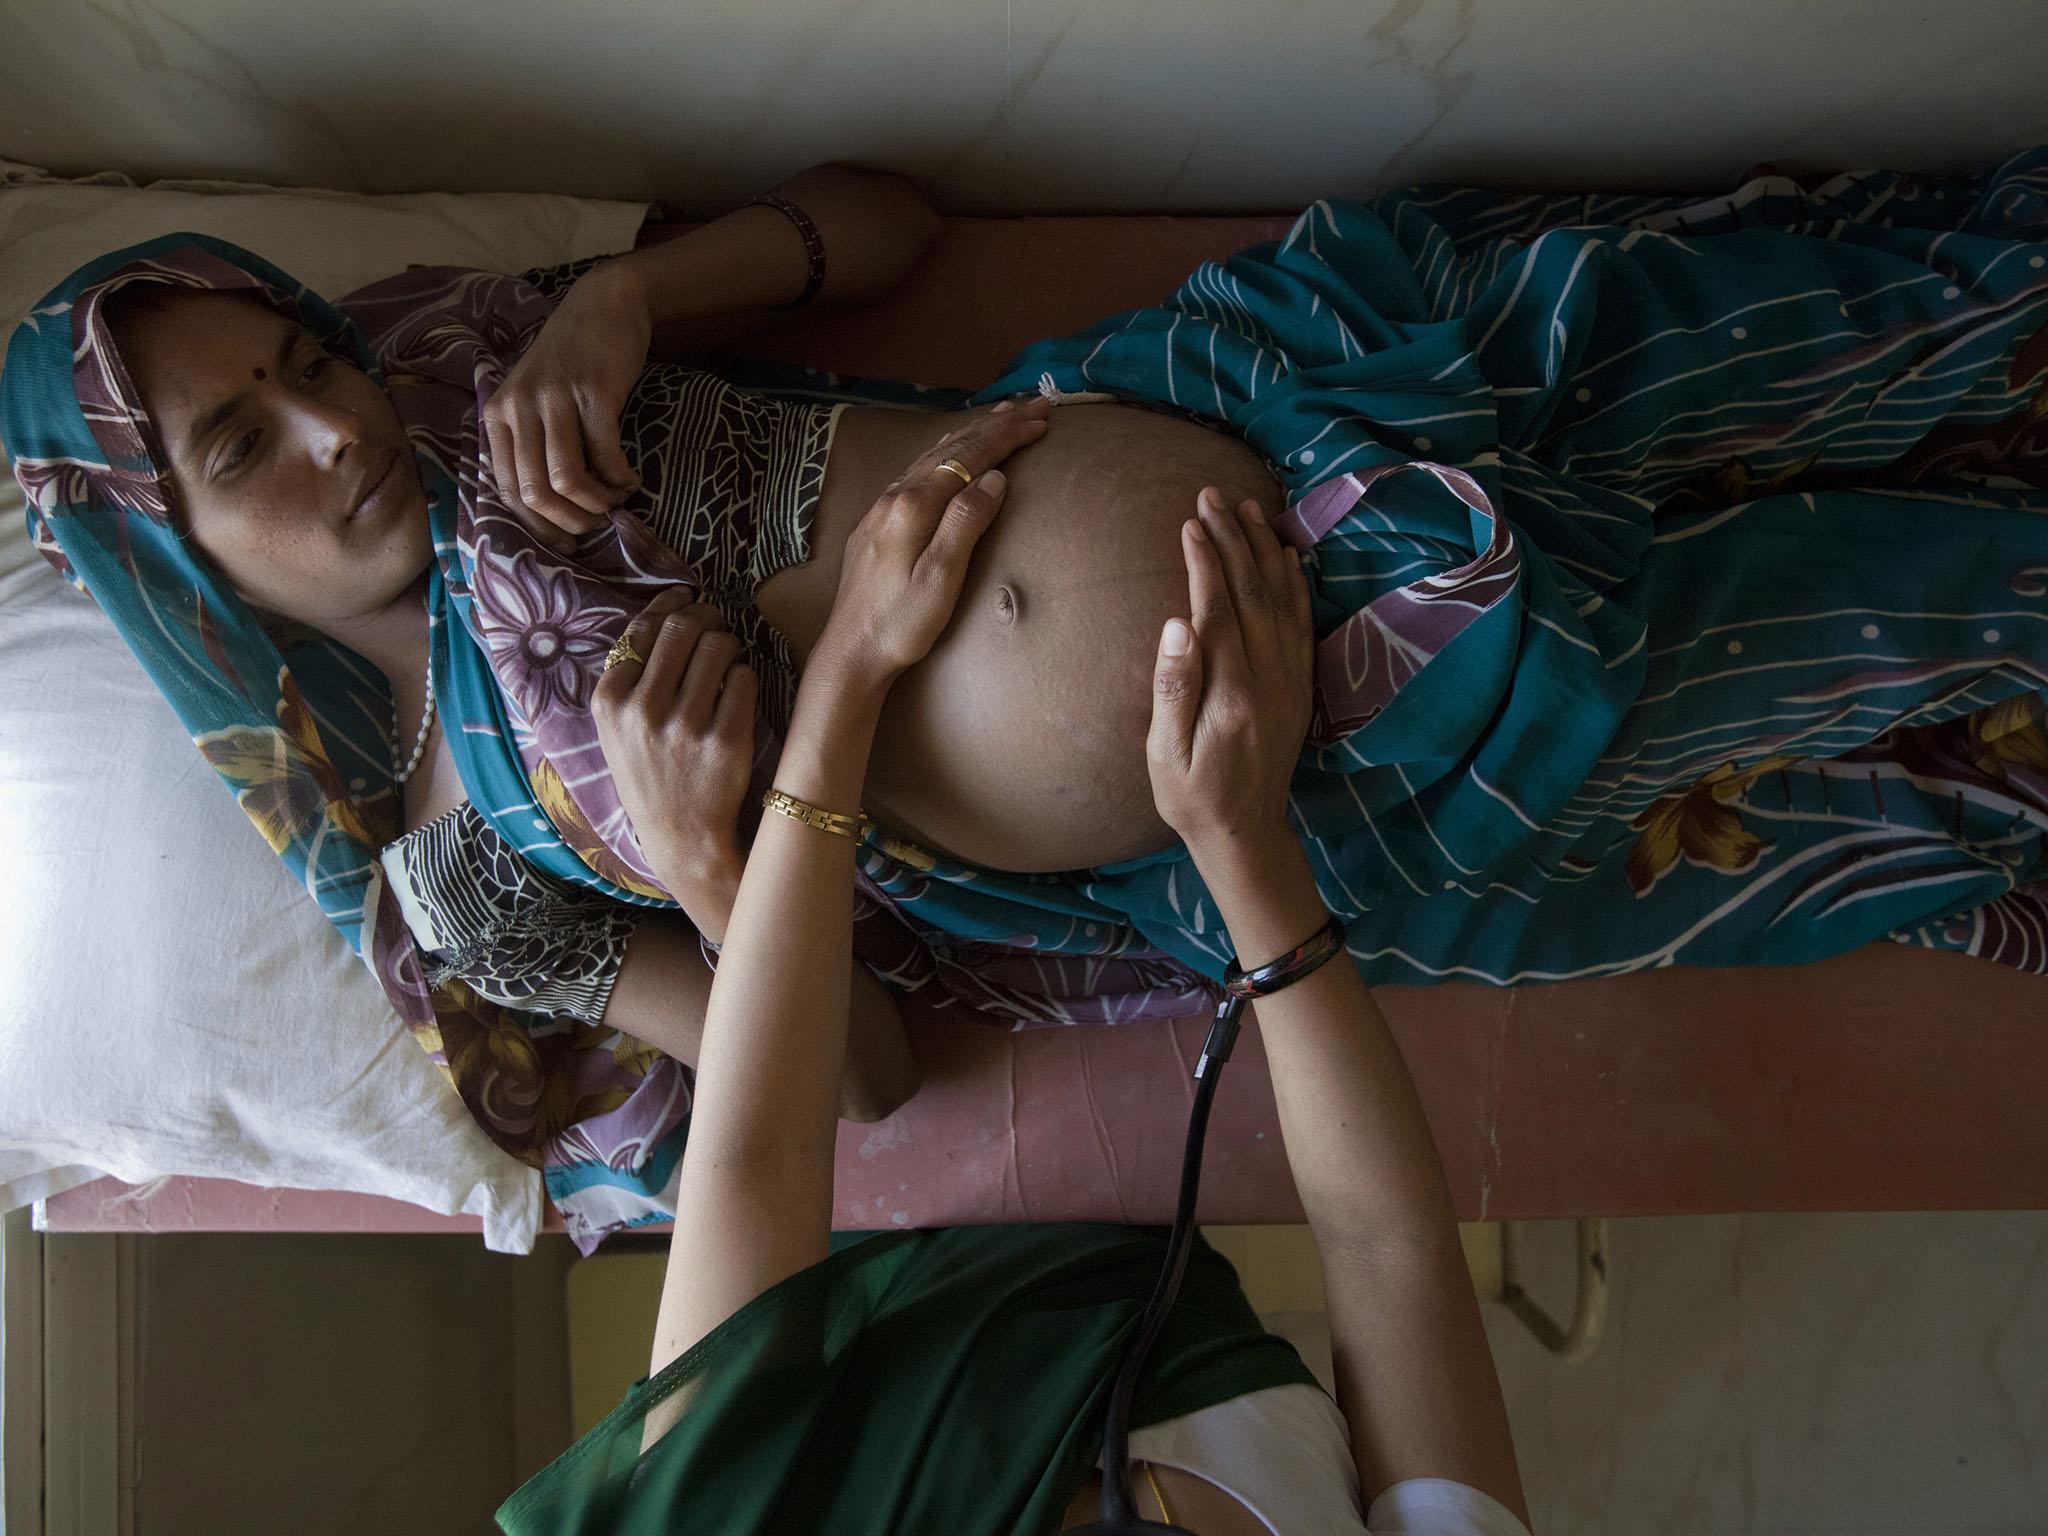 One in 10 children dies in childbirth as a result of violence against the mother